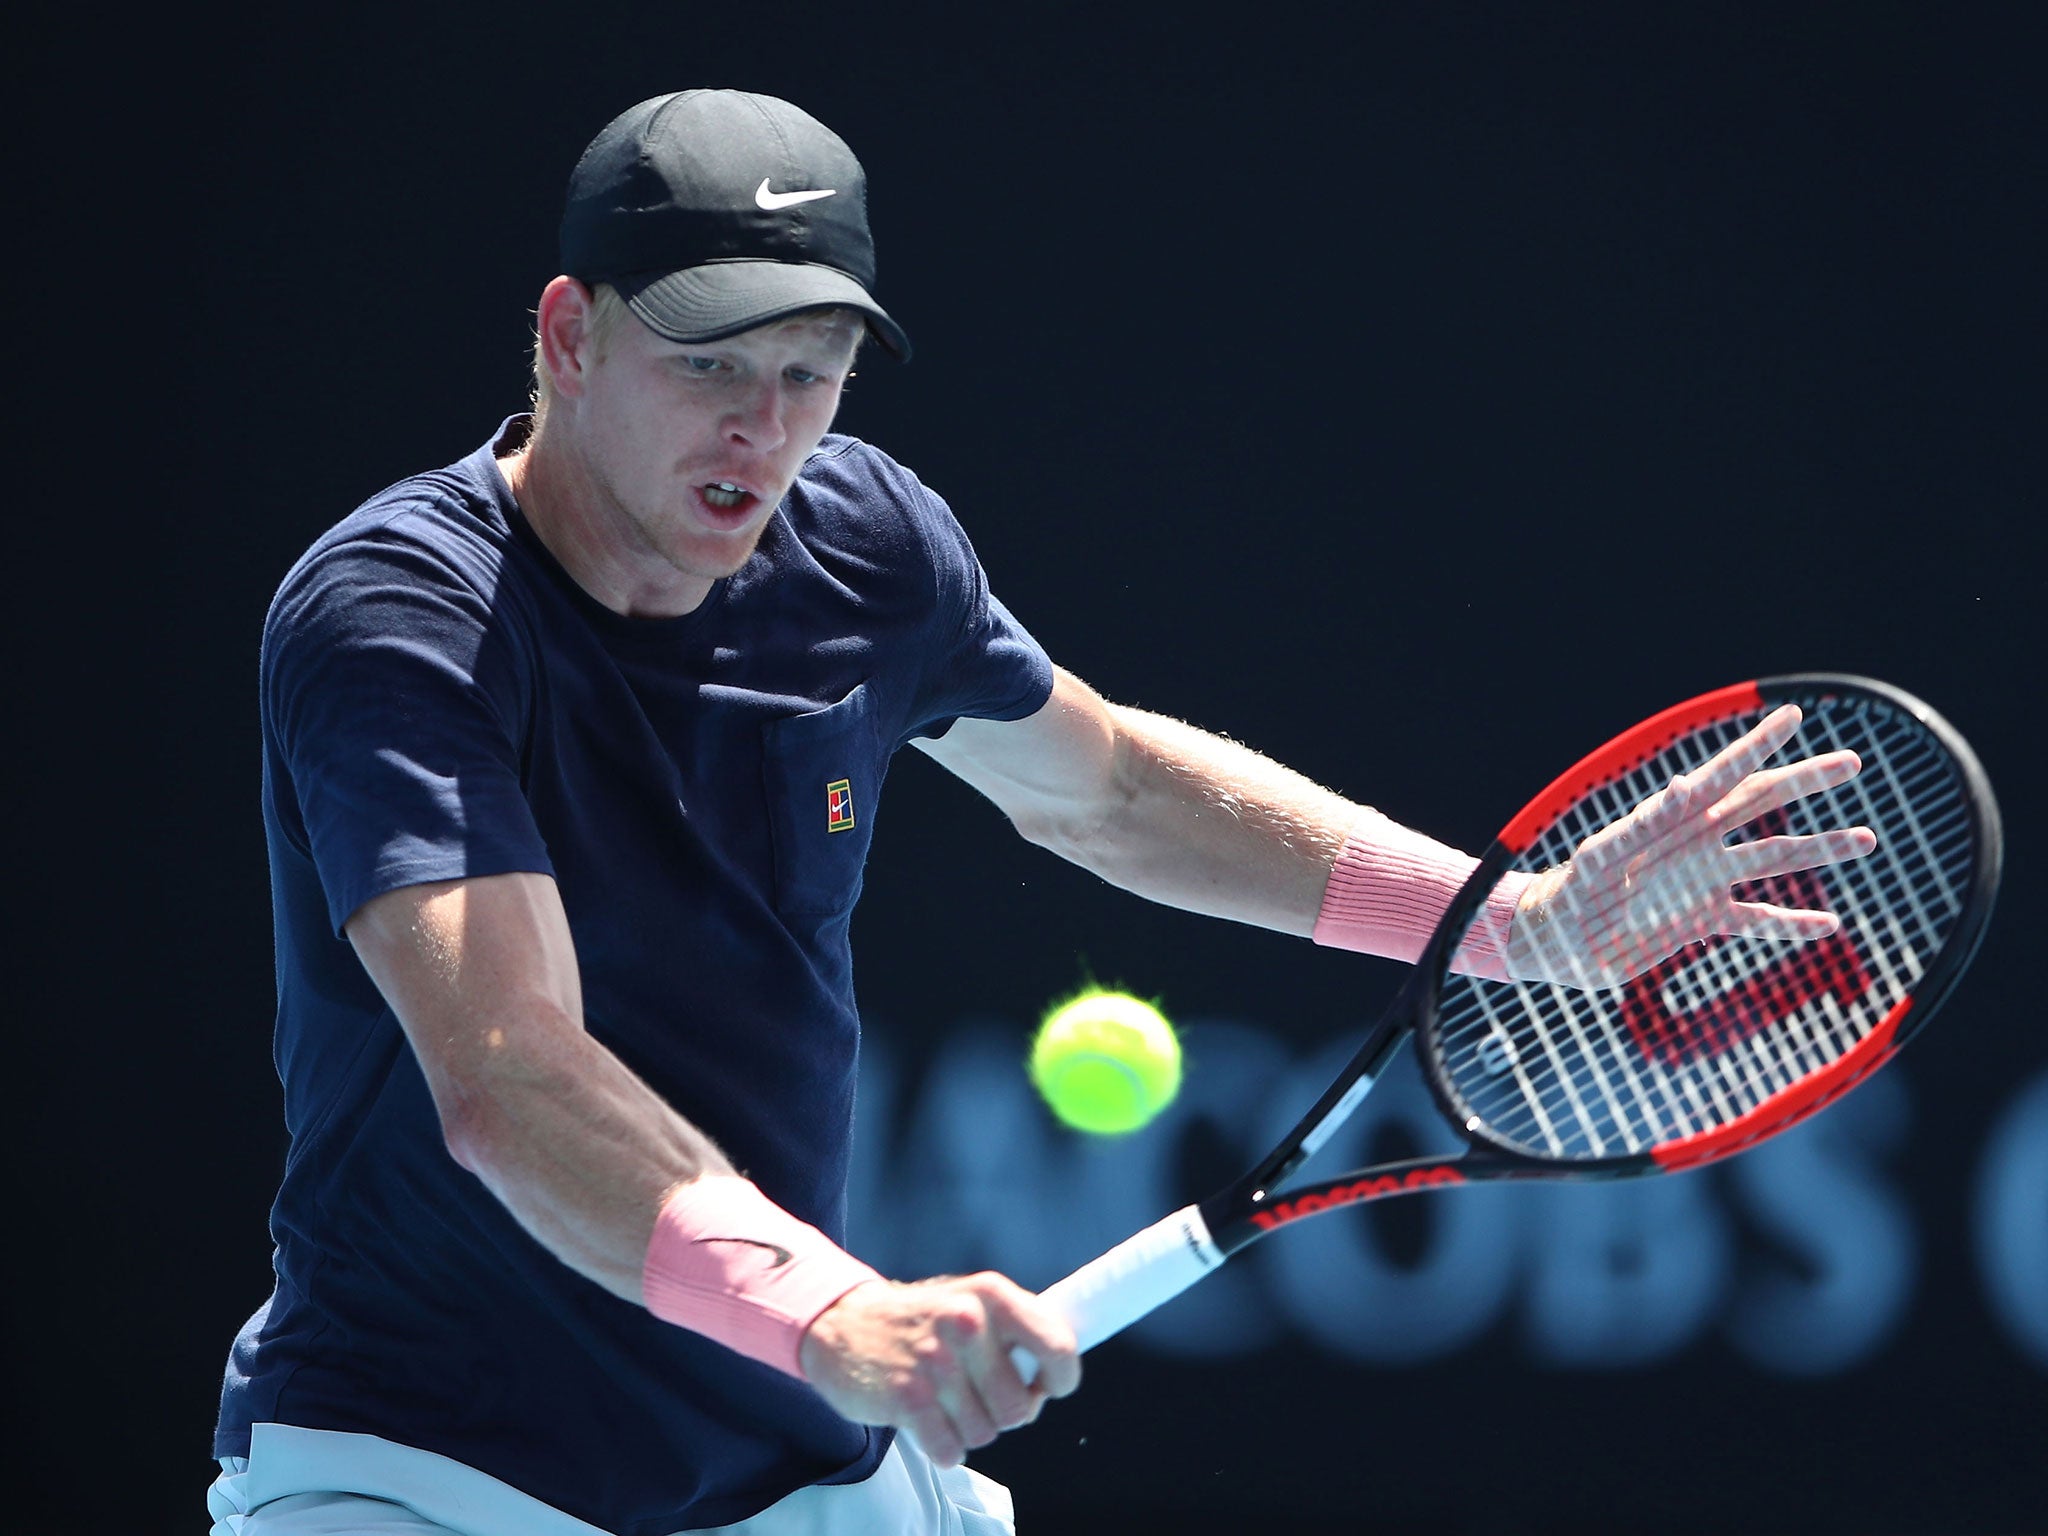 Kyle Edmund has reached the quarter-final of a Grand Slam for the first time in his career